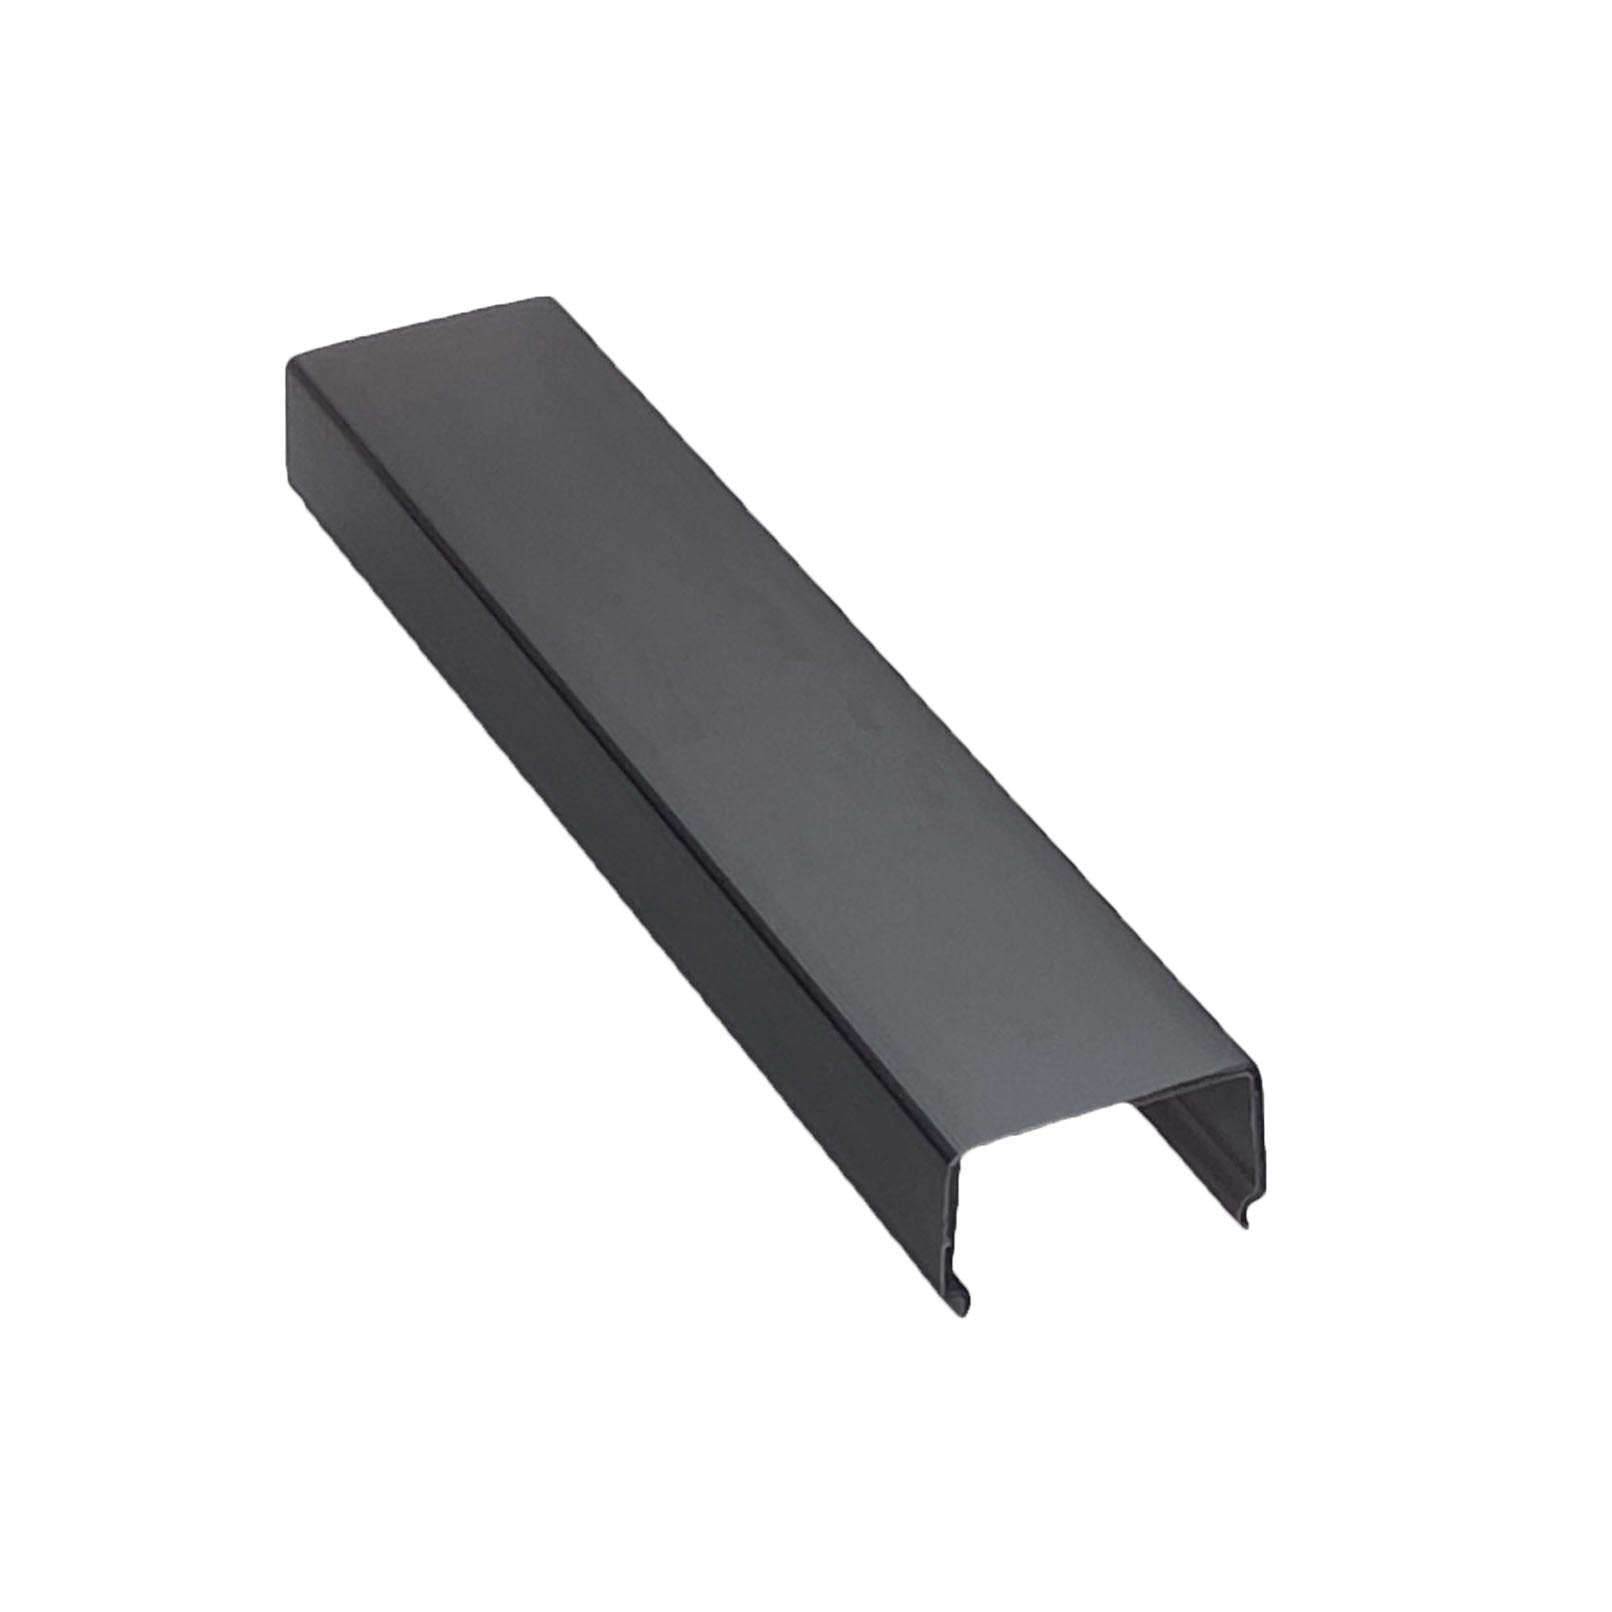 MOSS-ALQ-3015C - Square - Cover Only - Black - 2.44 Meter